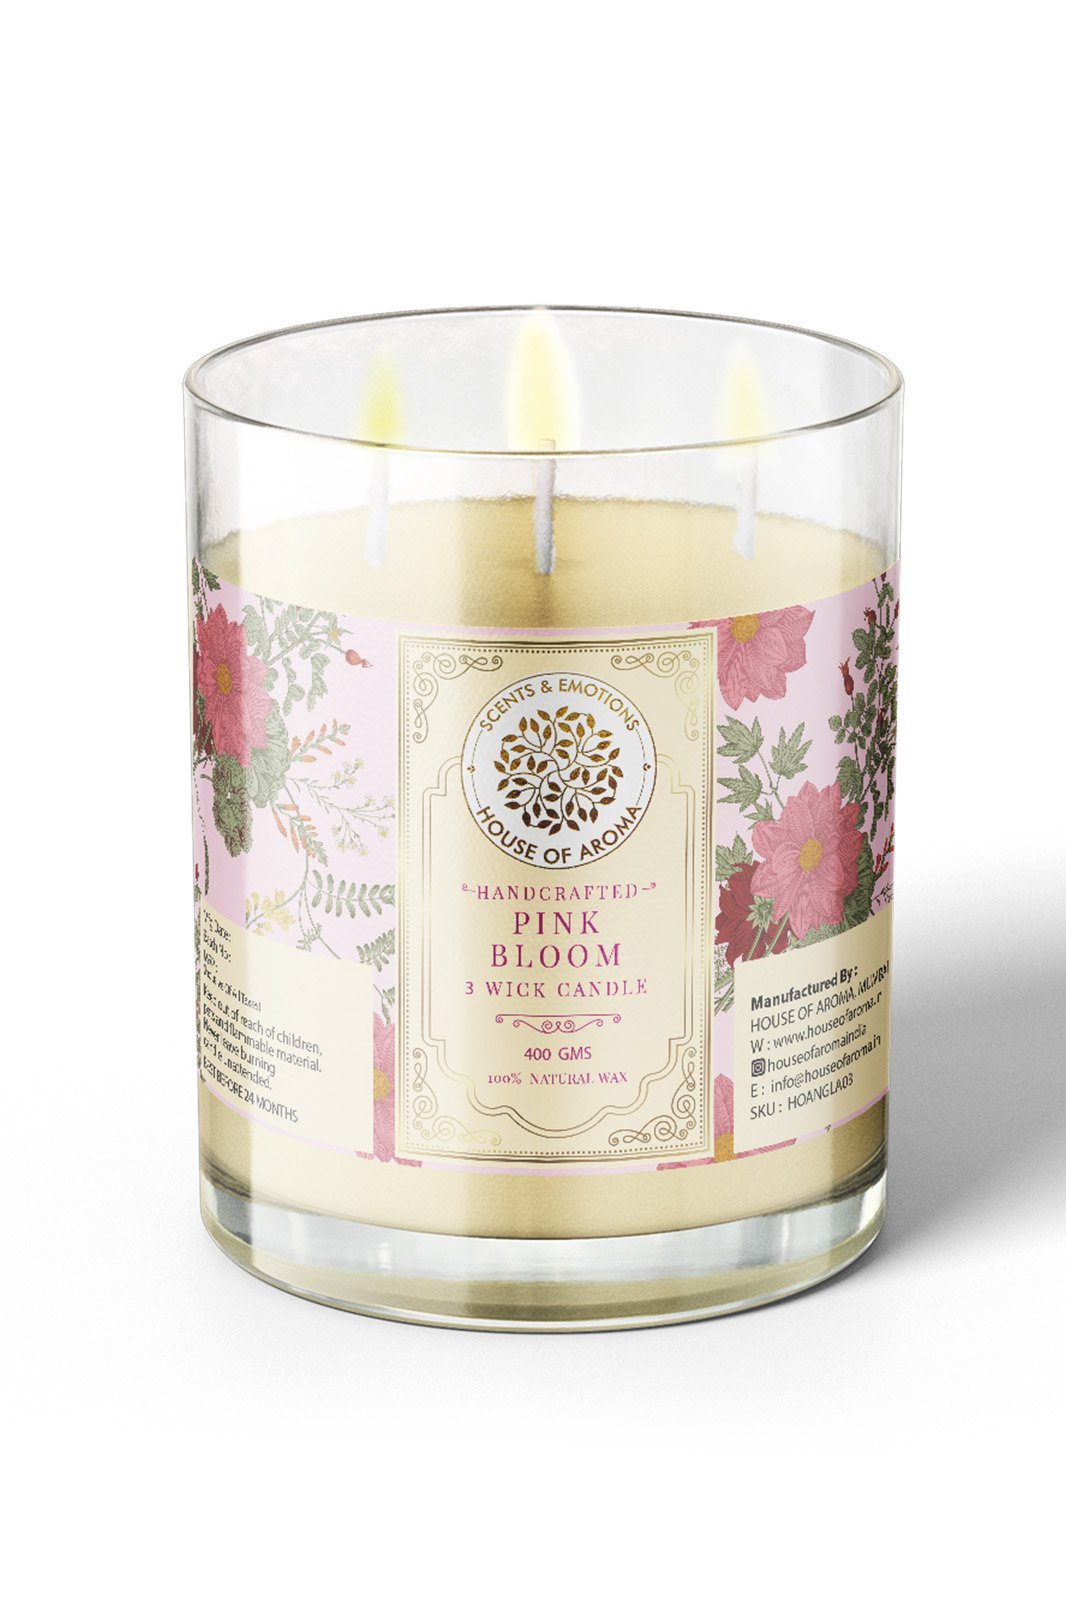 natural wax pink bloom candle 3 wicks, floral scented candles, 3 wicks scented candles, 3 wicks candles, scented 3 wick candles, scented candles flavours, best-scented flowers in India, scented candles for decoration, best 3 wick scented candles, 3 wick jar candles, scented candles for living room, best floral scented candles, 3 wick soy candles, flower scented candles, popular floral candle scents, most popular floral candle scents, highly scented 3 wick candles, floral scents for candles, large 3 wick scented pillar candles, floral fragrance scented candles, floral scent for candles, most fragrant scented candles, pink floral scented candles, most common scented candles, floral candle fragrance oil, floral aromatherapy candle, home decor candles, decoration with candles, room decor with candles, home decor candle, scented candles decoration